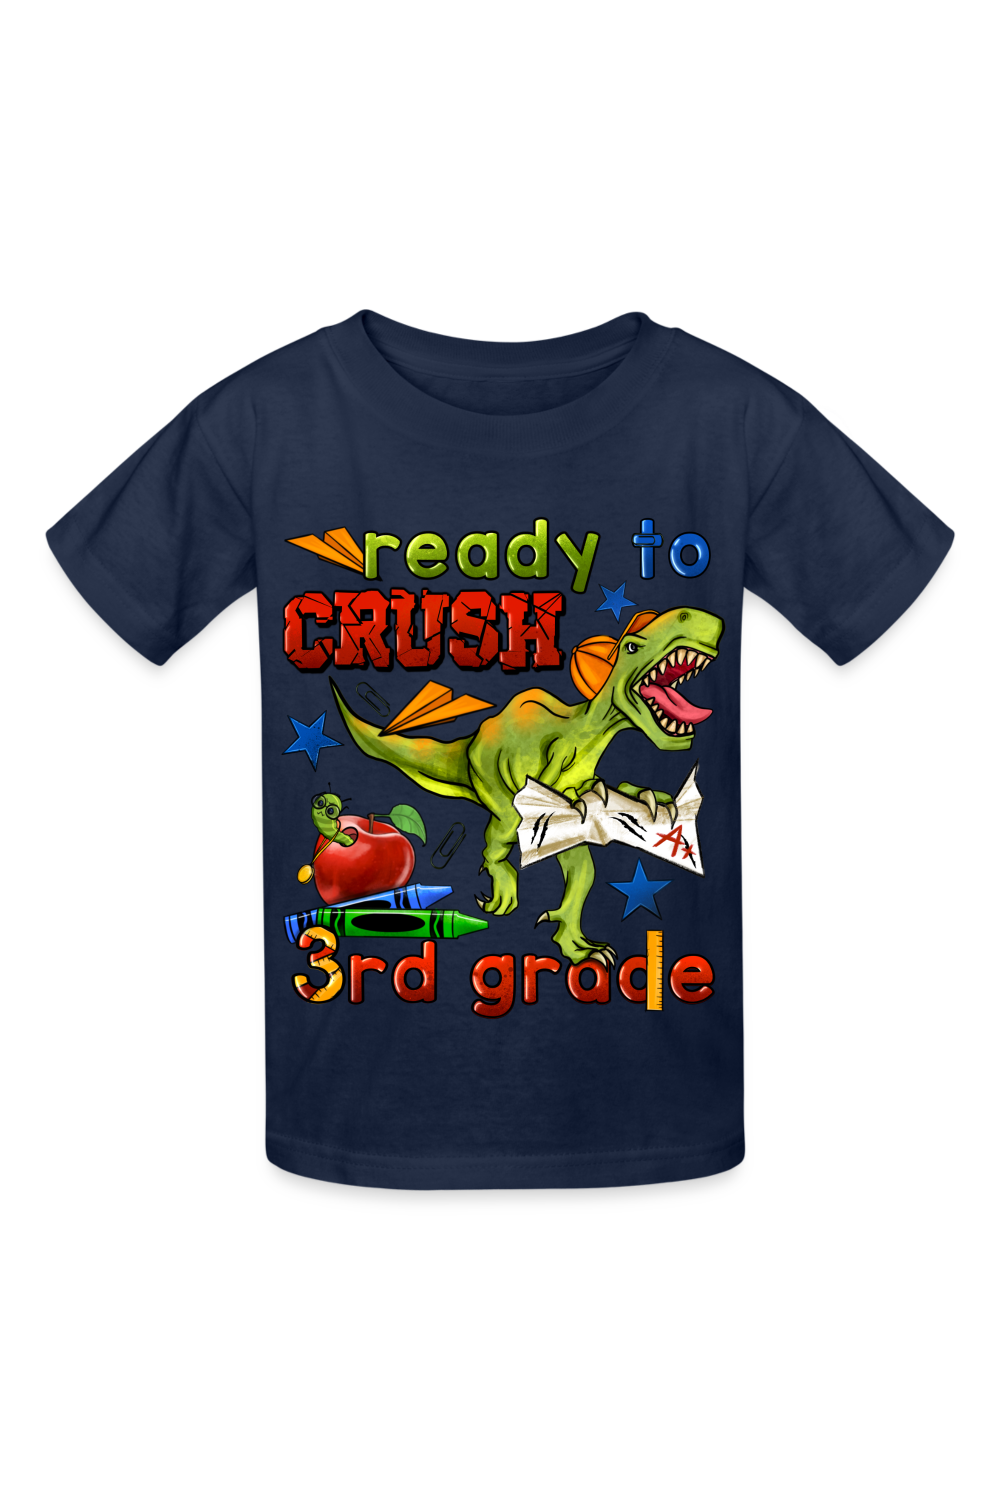 Boys Ready To Crush Third Grade Short Sleeve Tee Shirts for Back To School - navy - NicholesGifts.online